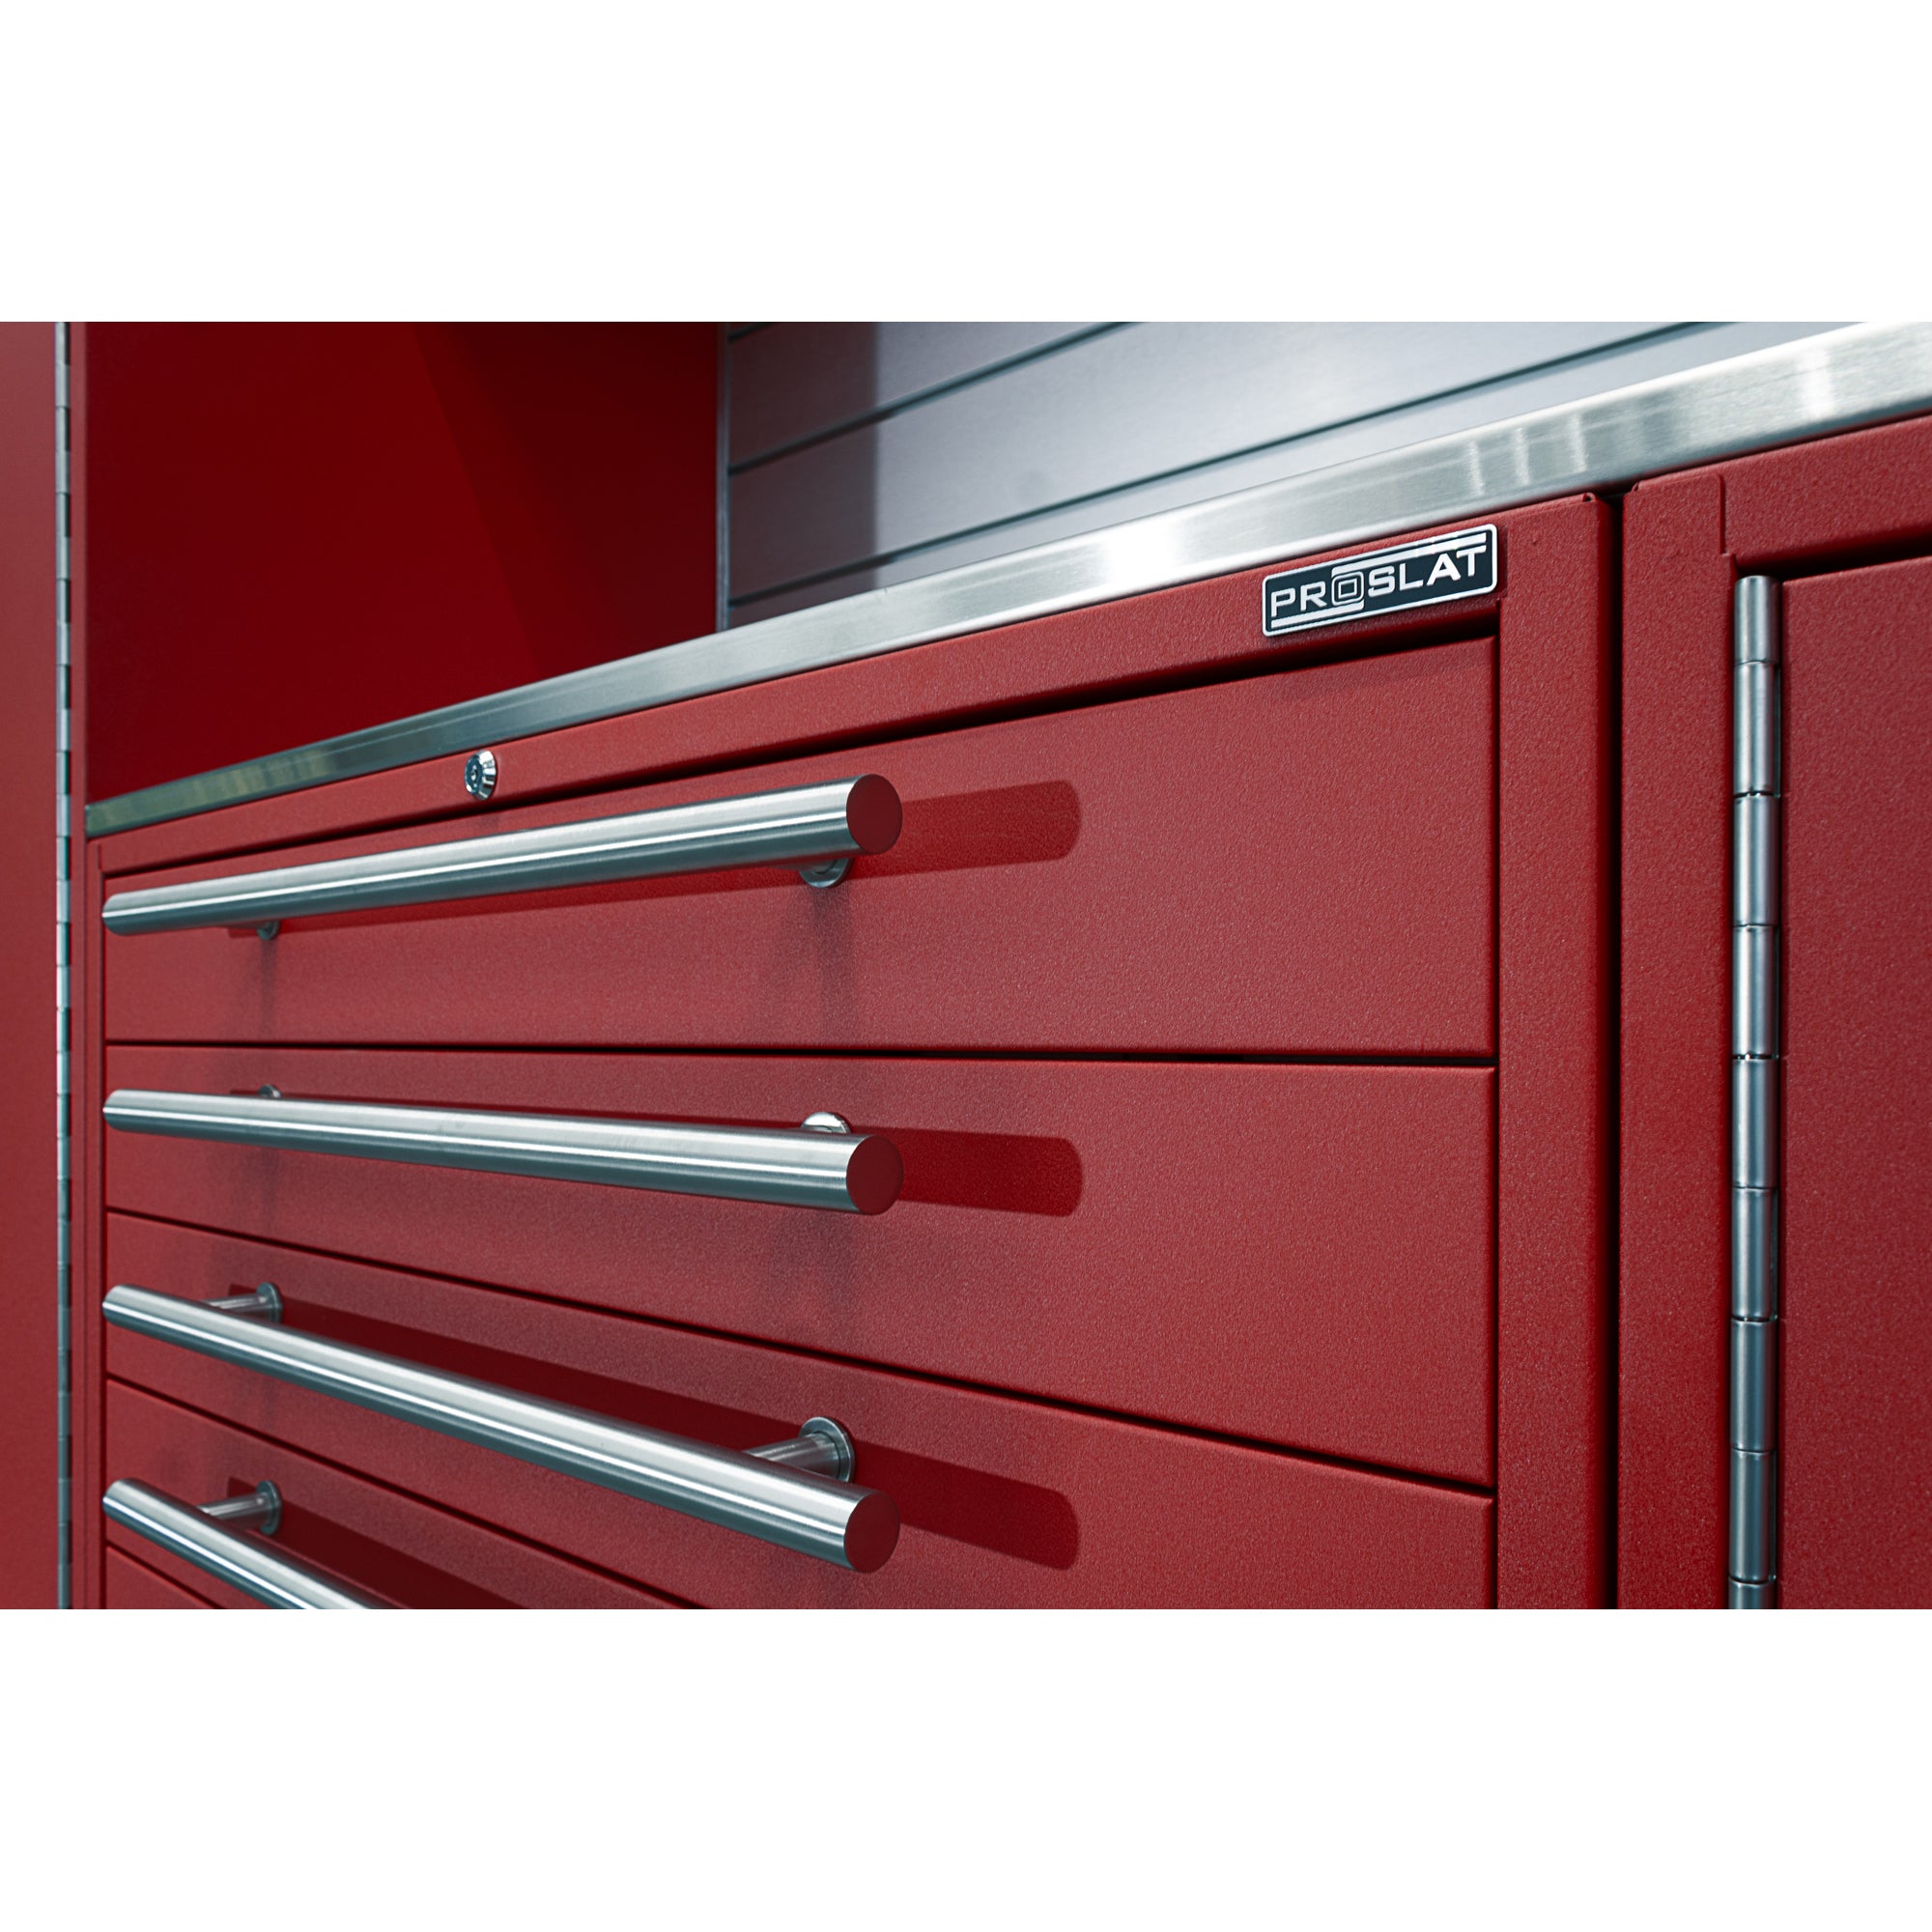 LUX Cabinets – 13 ft set – TOOL